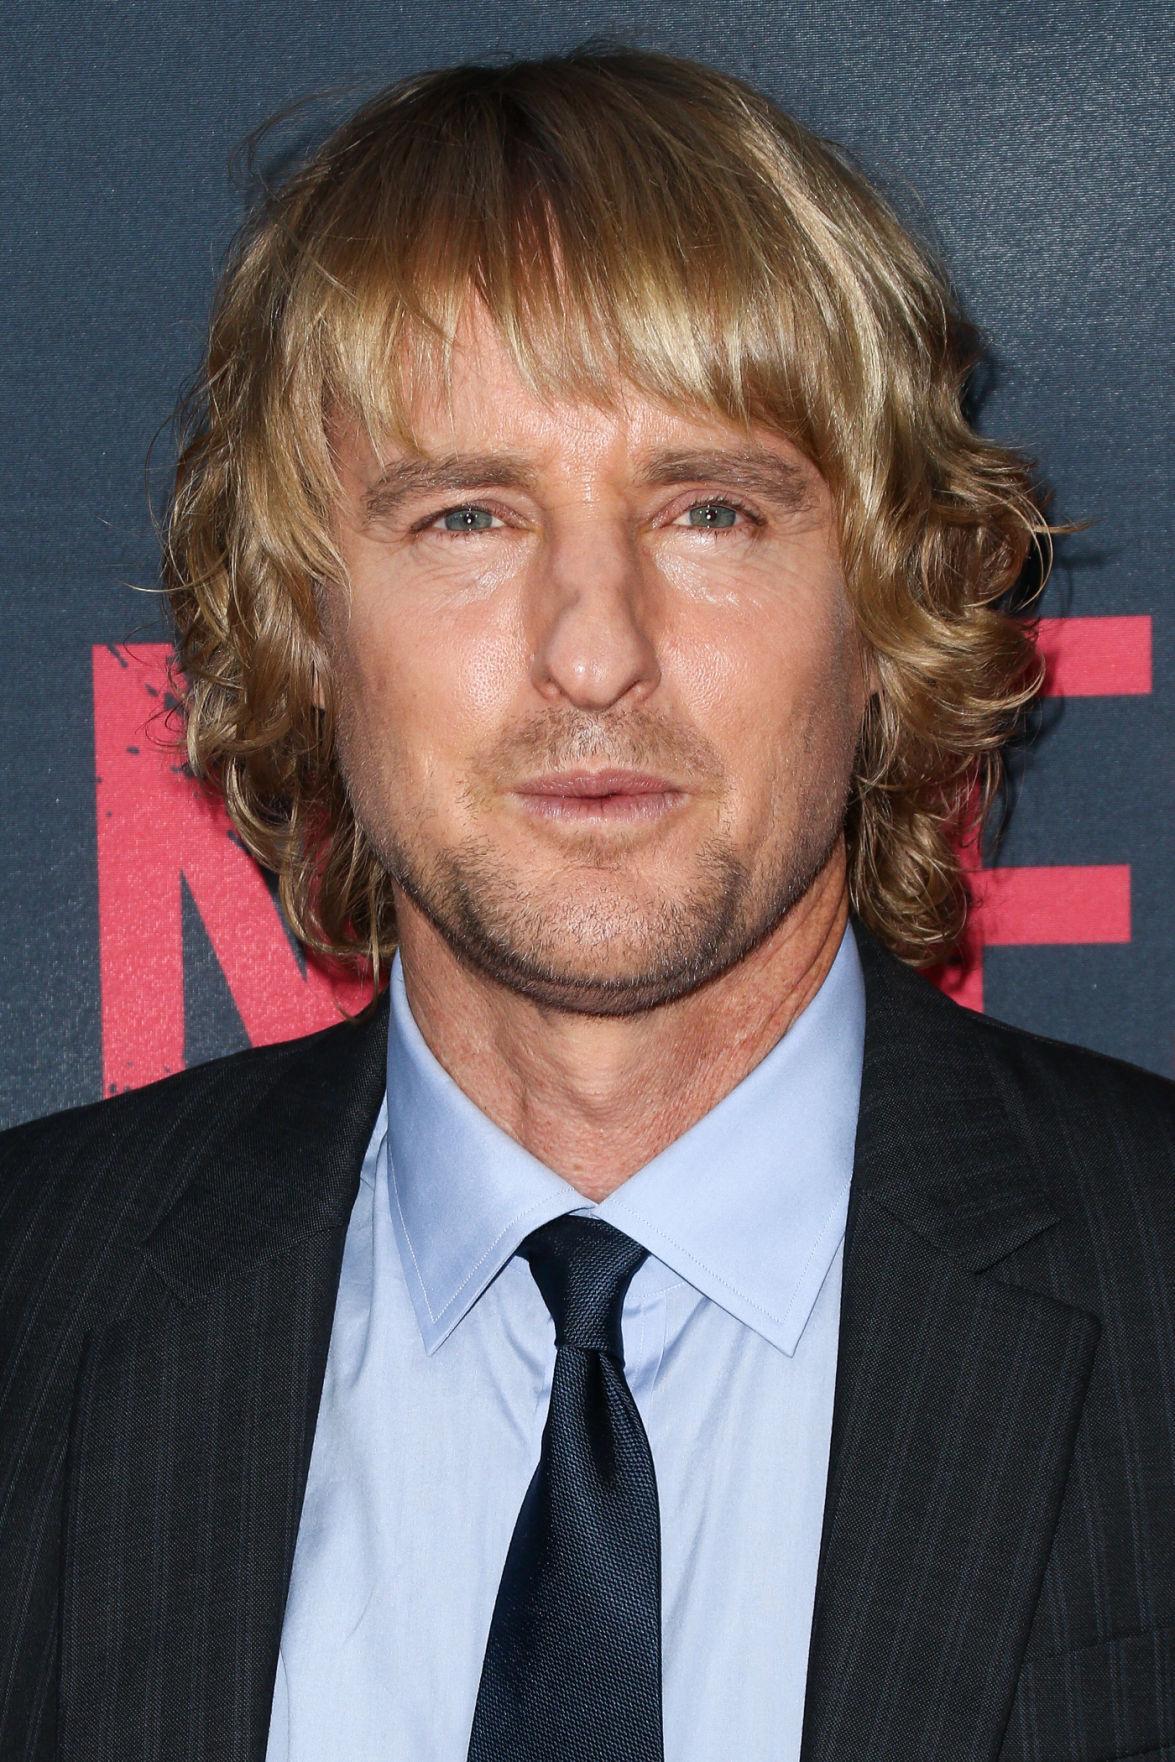 Owen Wilson in action movie 'No Escape': 'I'm not all of a ...